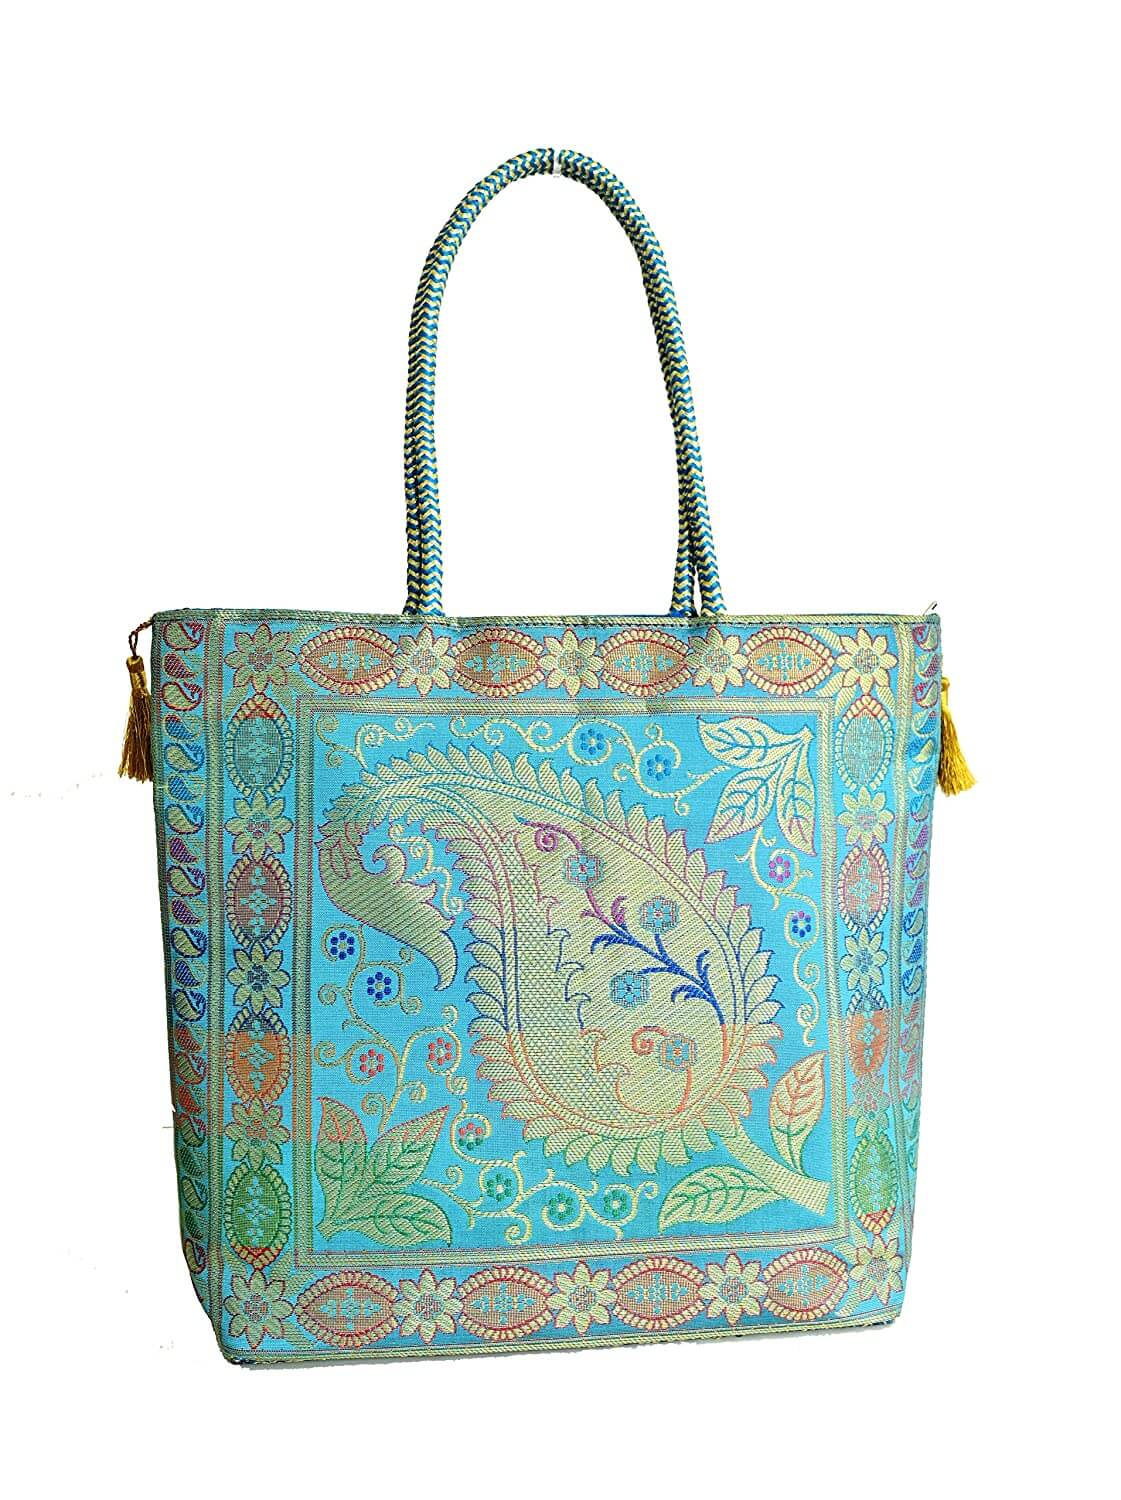 Embroidery Silk Handicraft Hand Bag, Shoulder, Tote Bag For Ladies (13 x 11.5 x 7.5 Inches, Leaves & Flower, Sky Blue Color) Mangal Fashions | Indian Home Decor and Craft